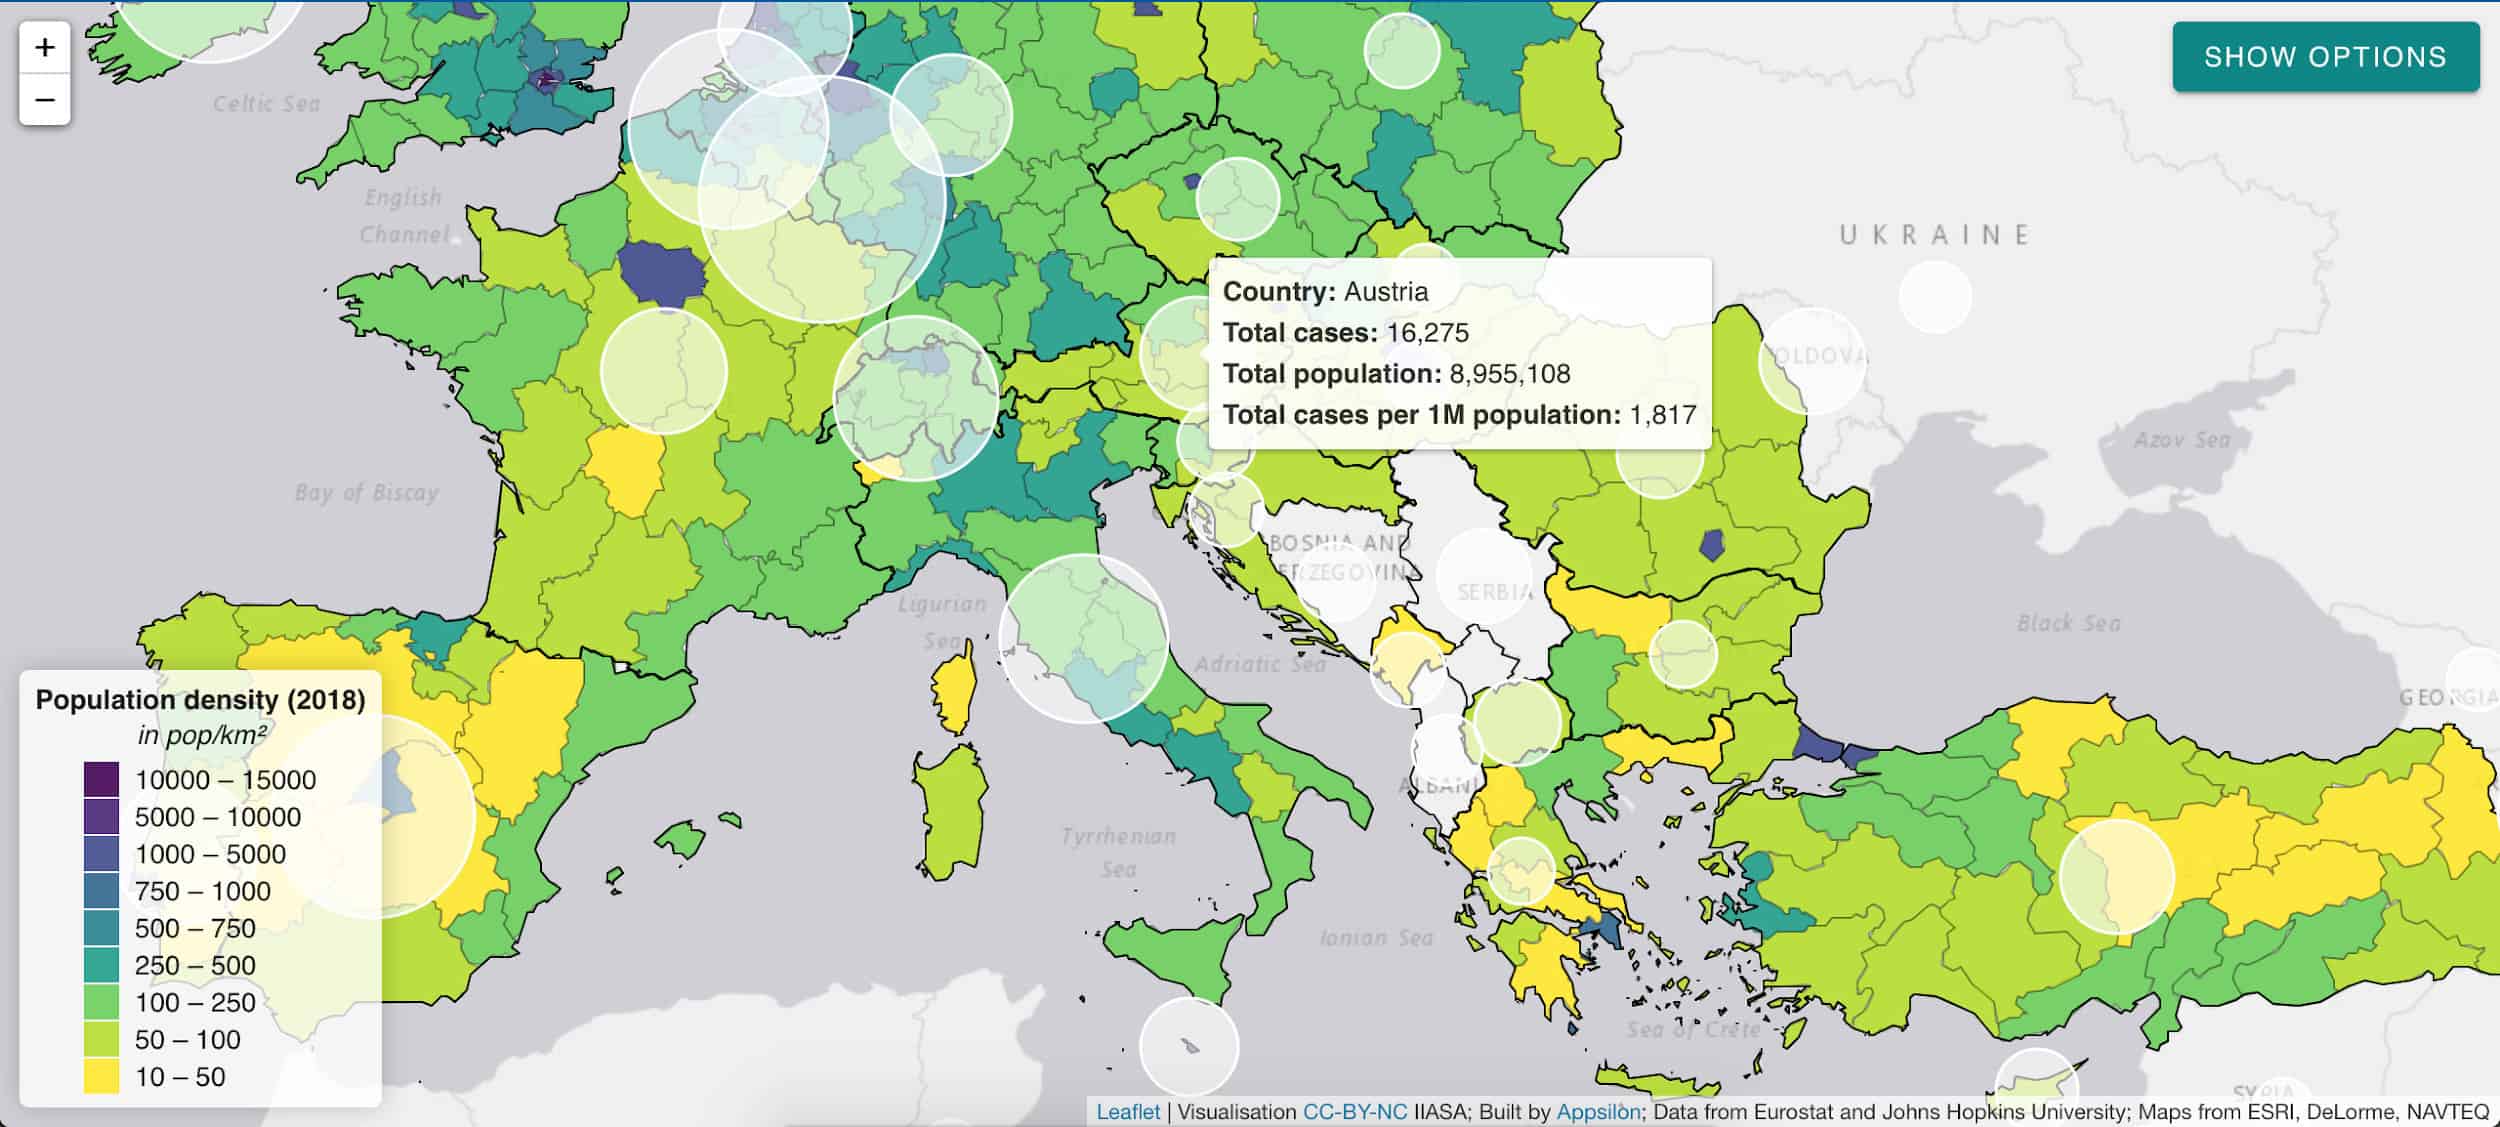 Map: White circles indicate the number of cases per 1 million citizens.